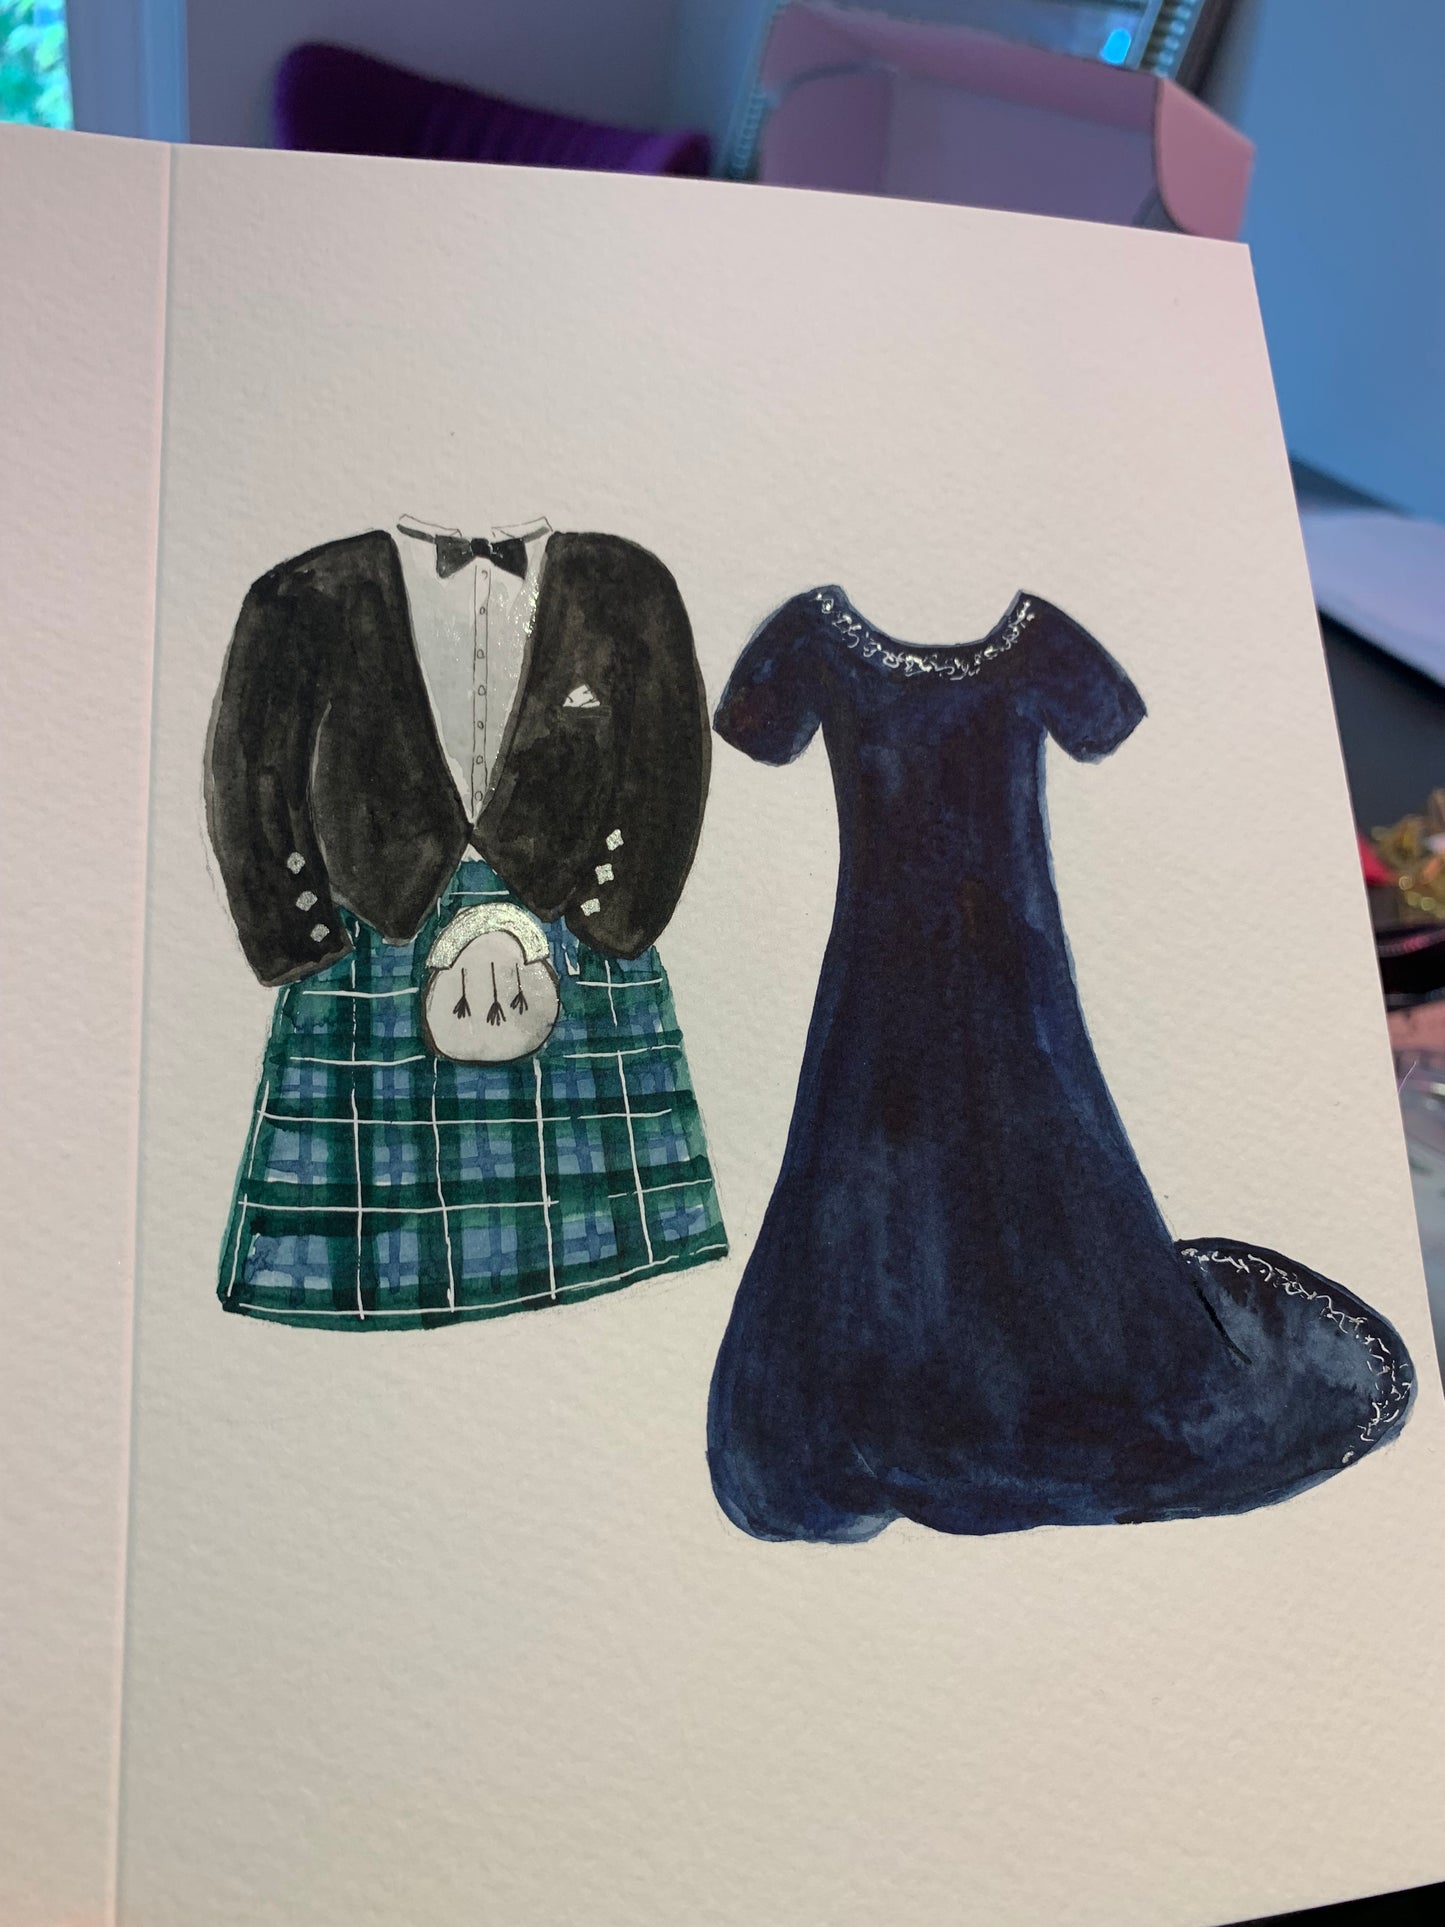 Hand Painted Watercolour Card - Wedding Outfits